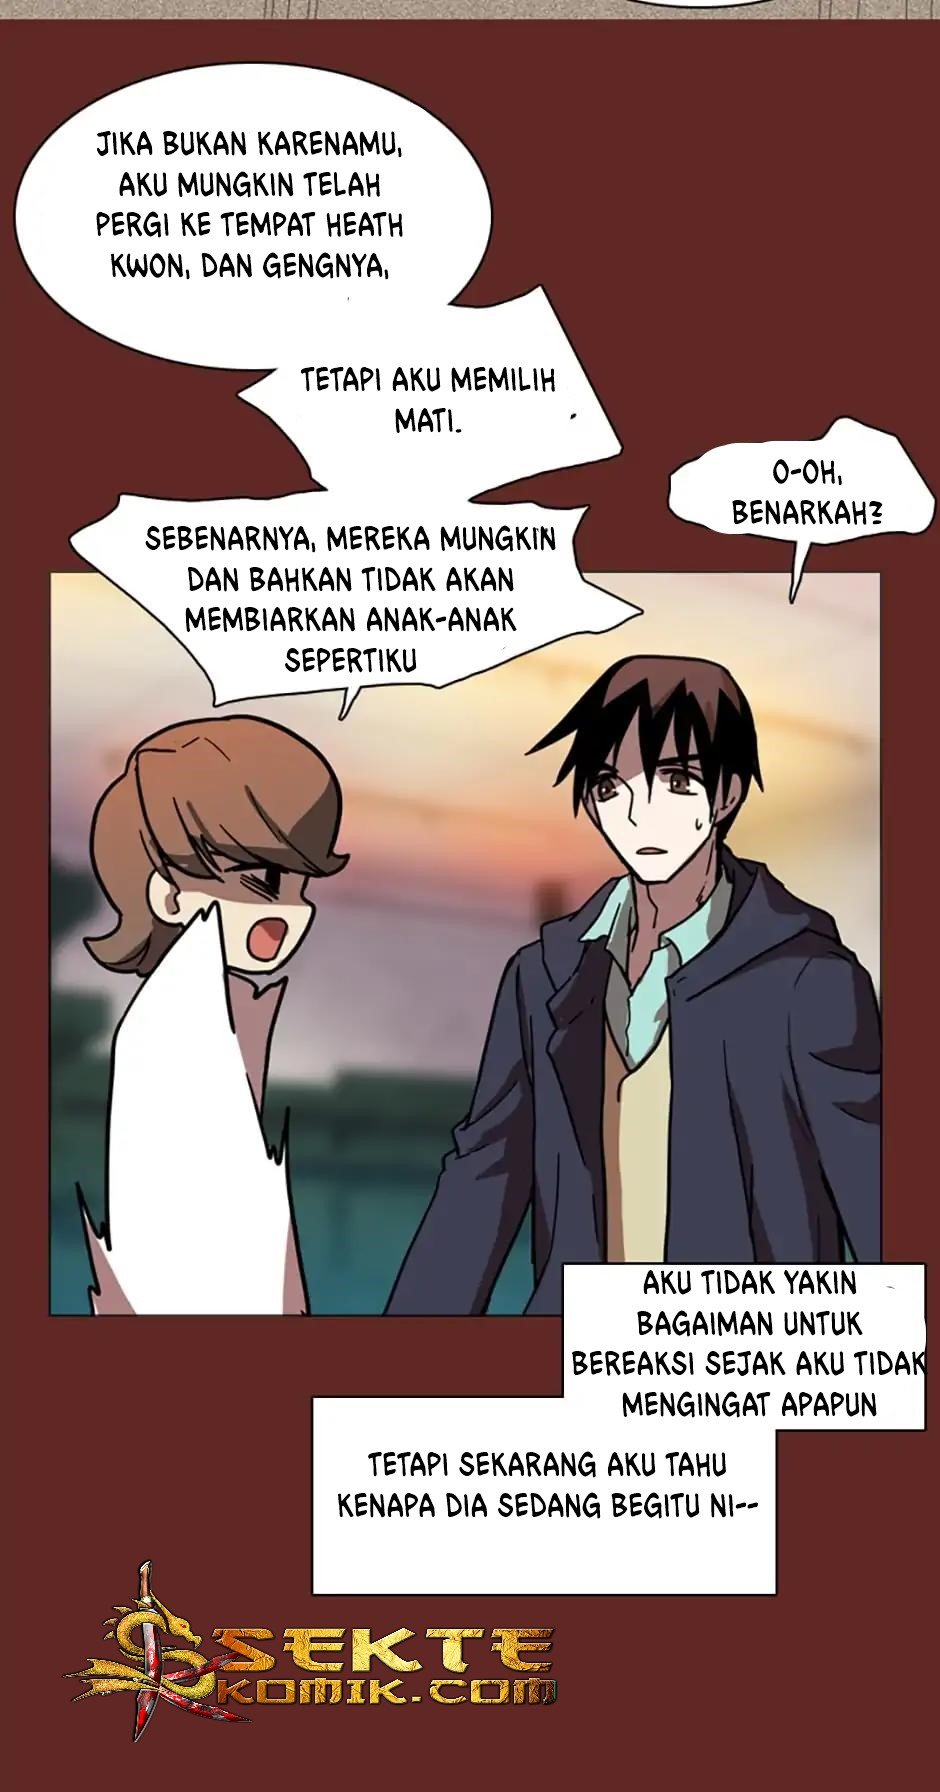 Dreamside Chapter 07